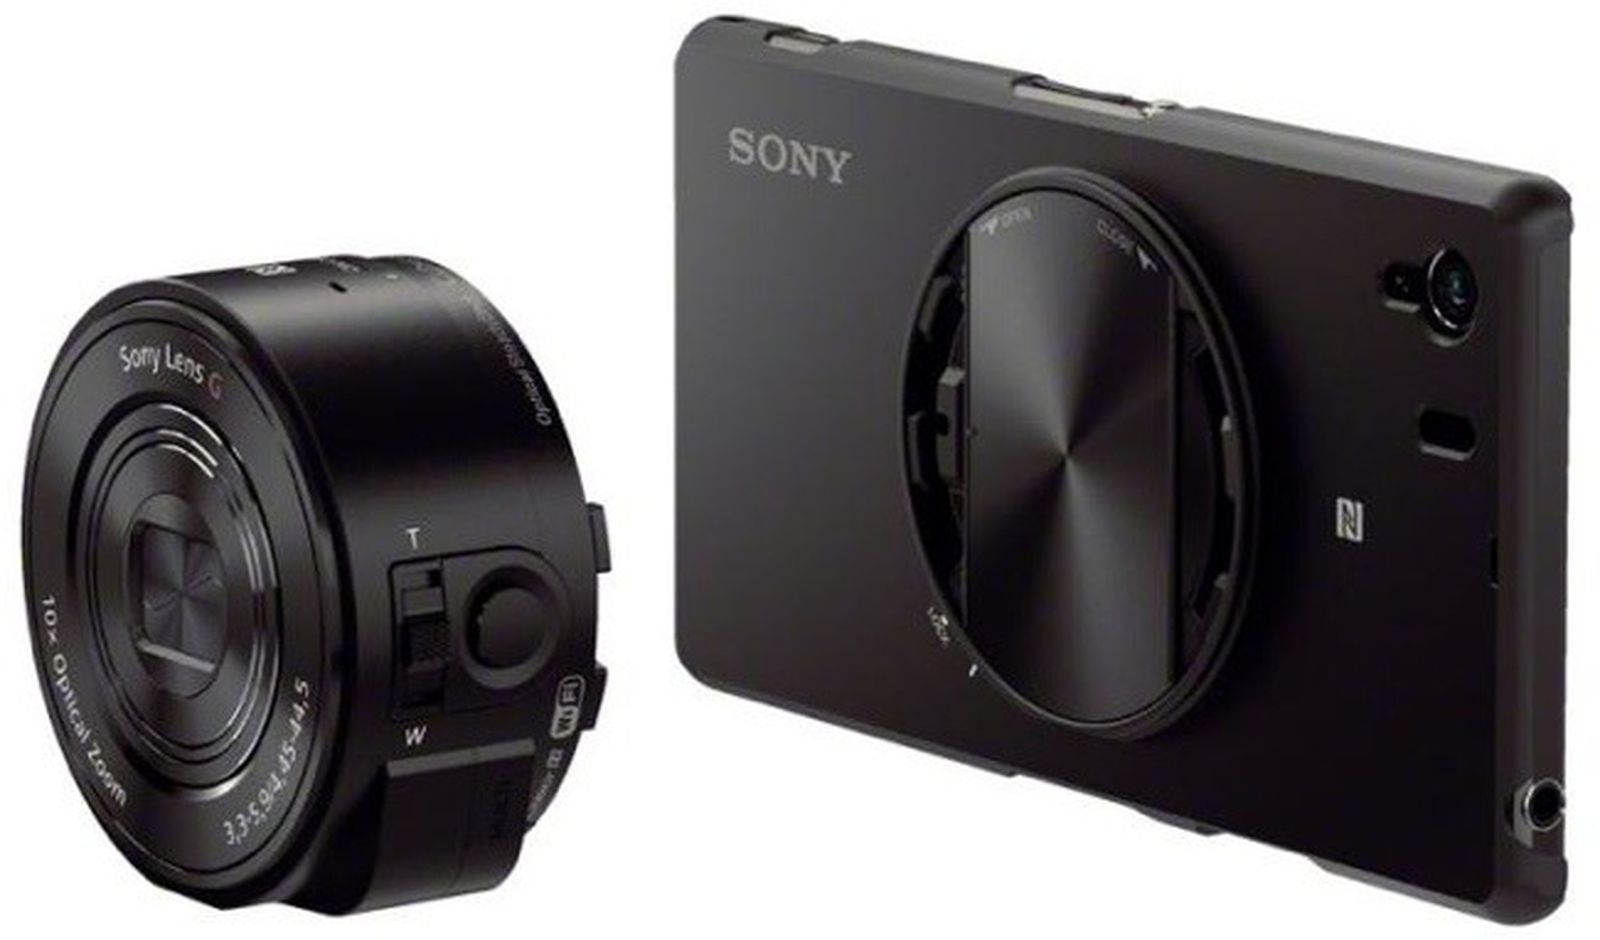 New Sony QX 'Lens-Style' Cameras Revealed in Leaked Press Release, Will